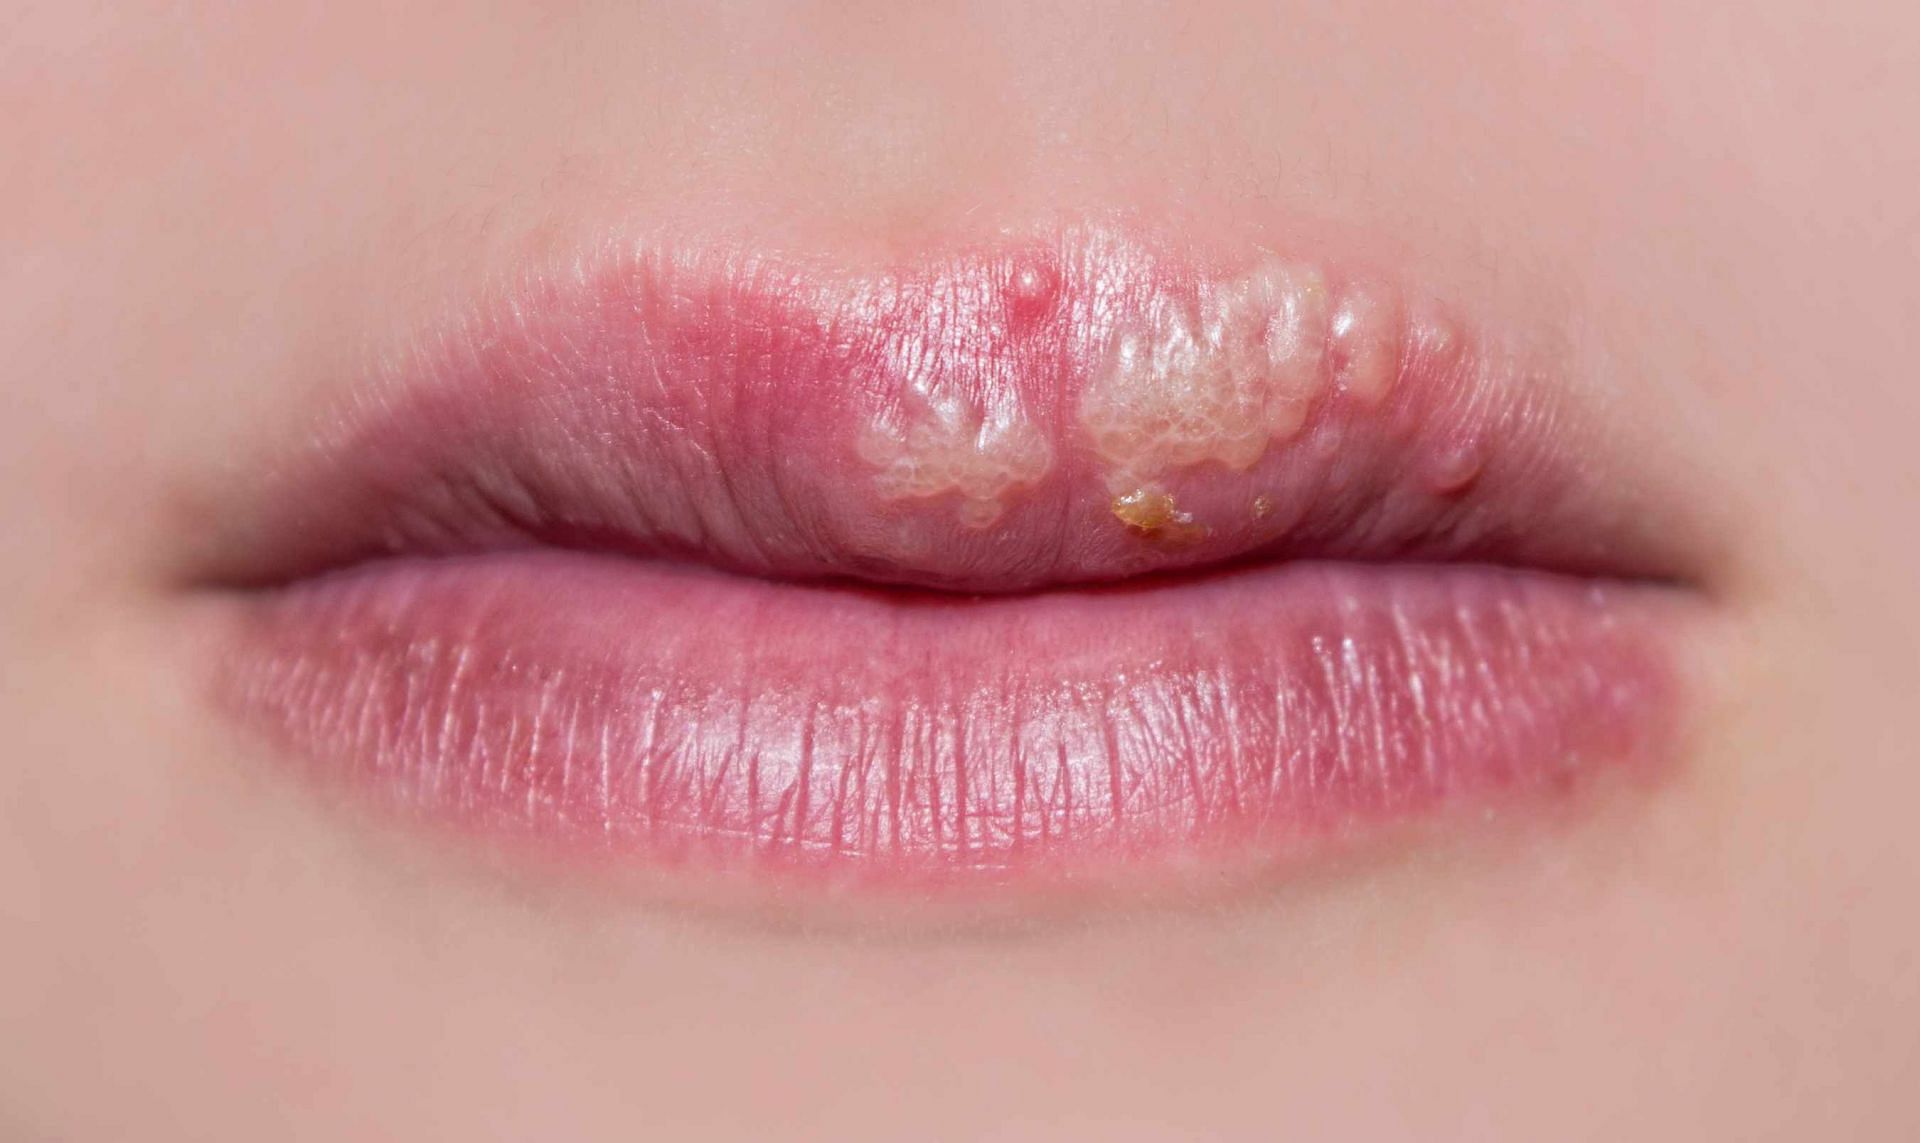 Unraveling the Symptoms of Cold Sores (Herpes Simplex) Image via Mayo Clinic  News Network